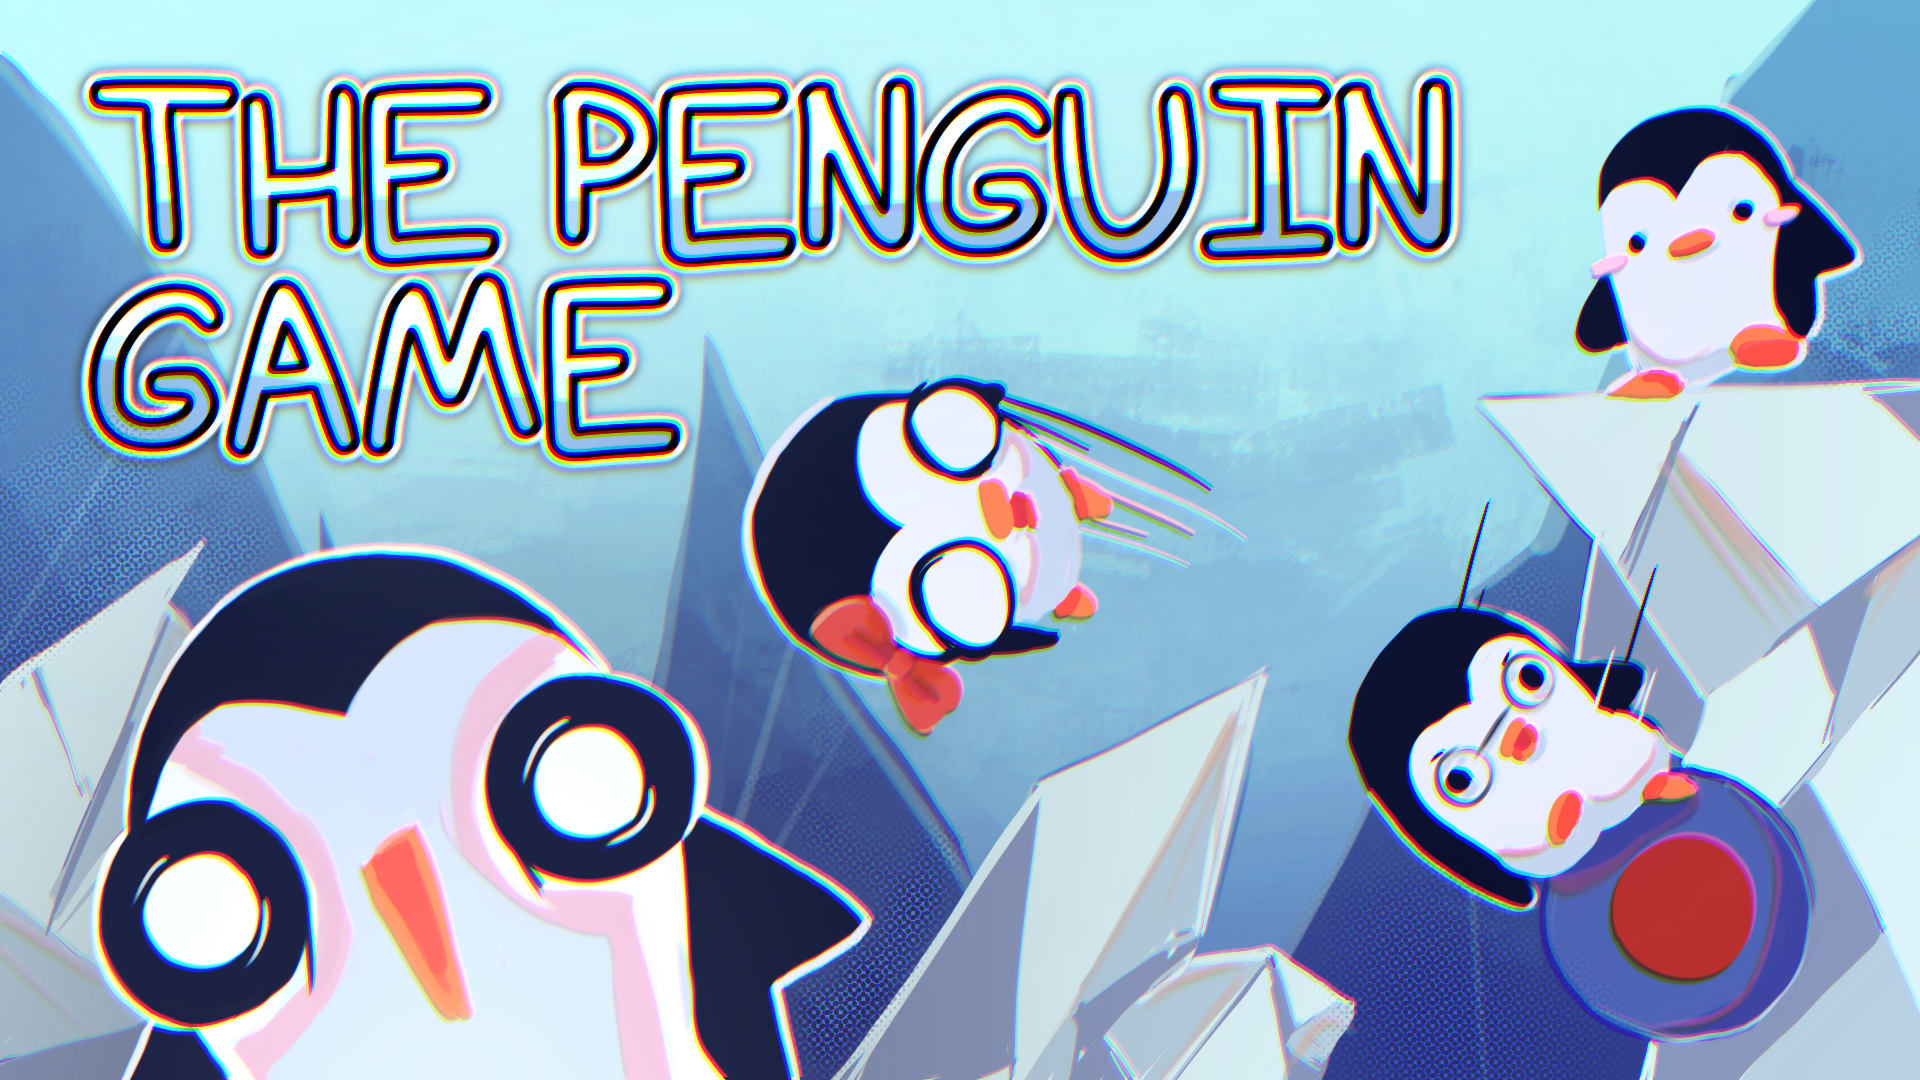 The Penguin Game